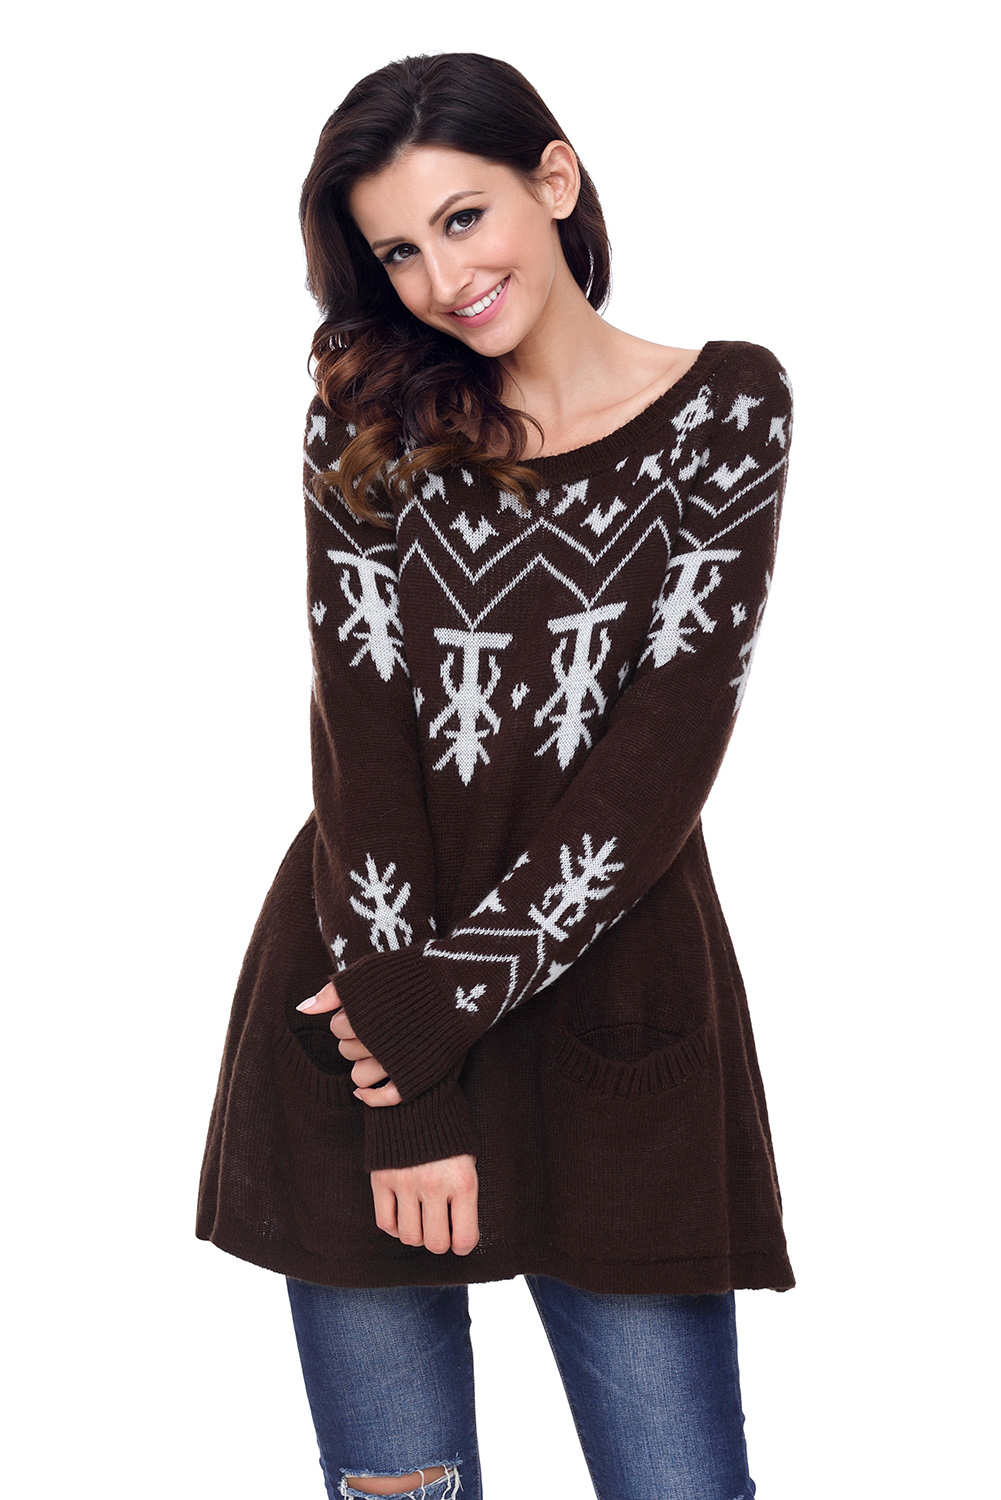 BY27720-17 Brown A-line Casual Fit Christmas Fashion Sweater